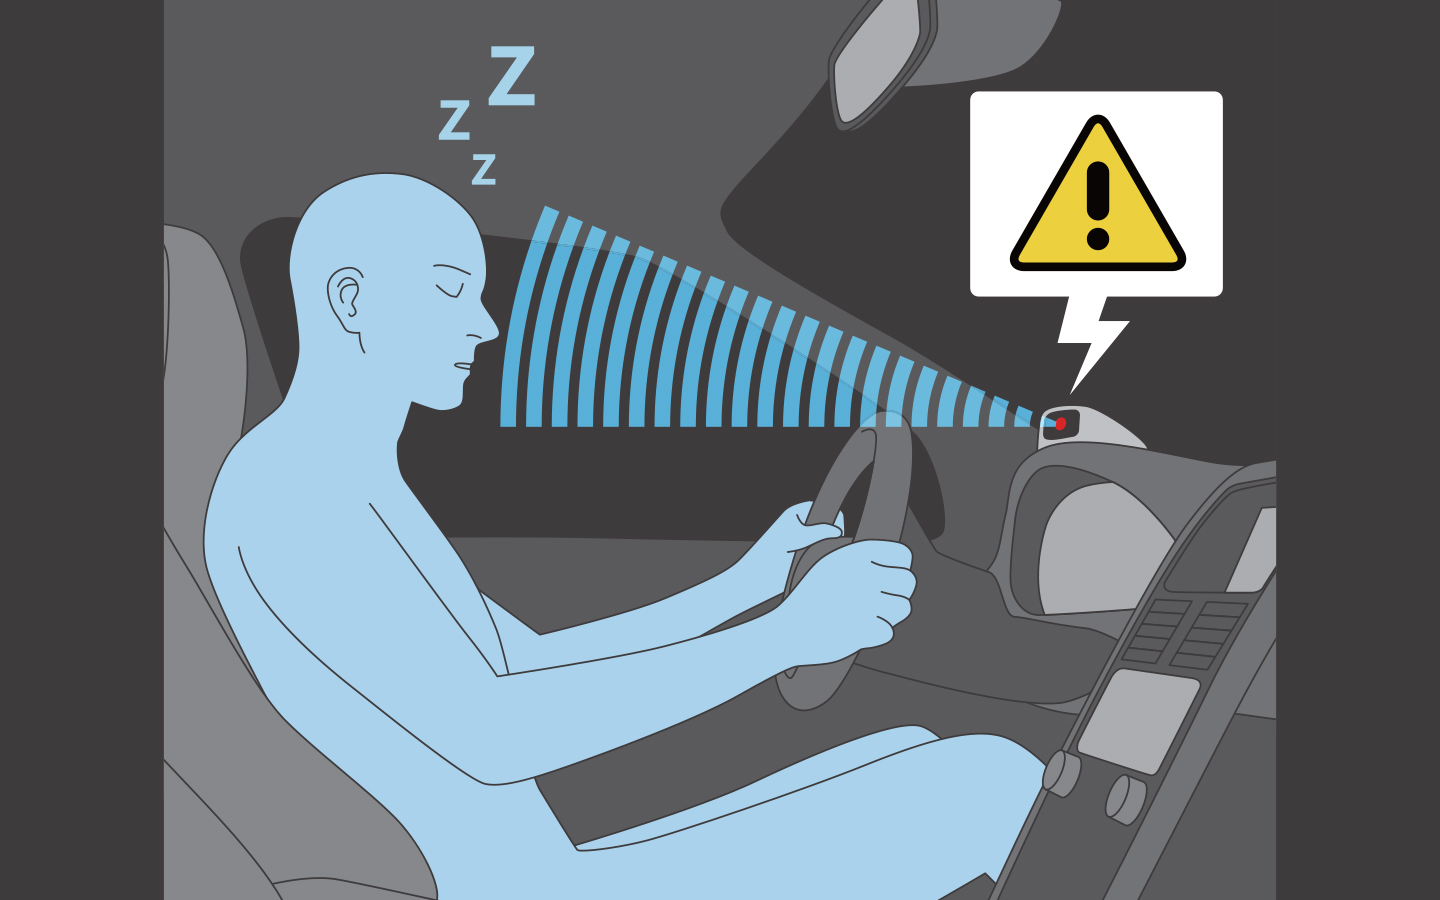 automakers have launched their distinct driver fatigue detection systems